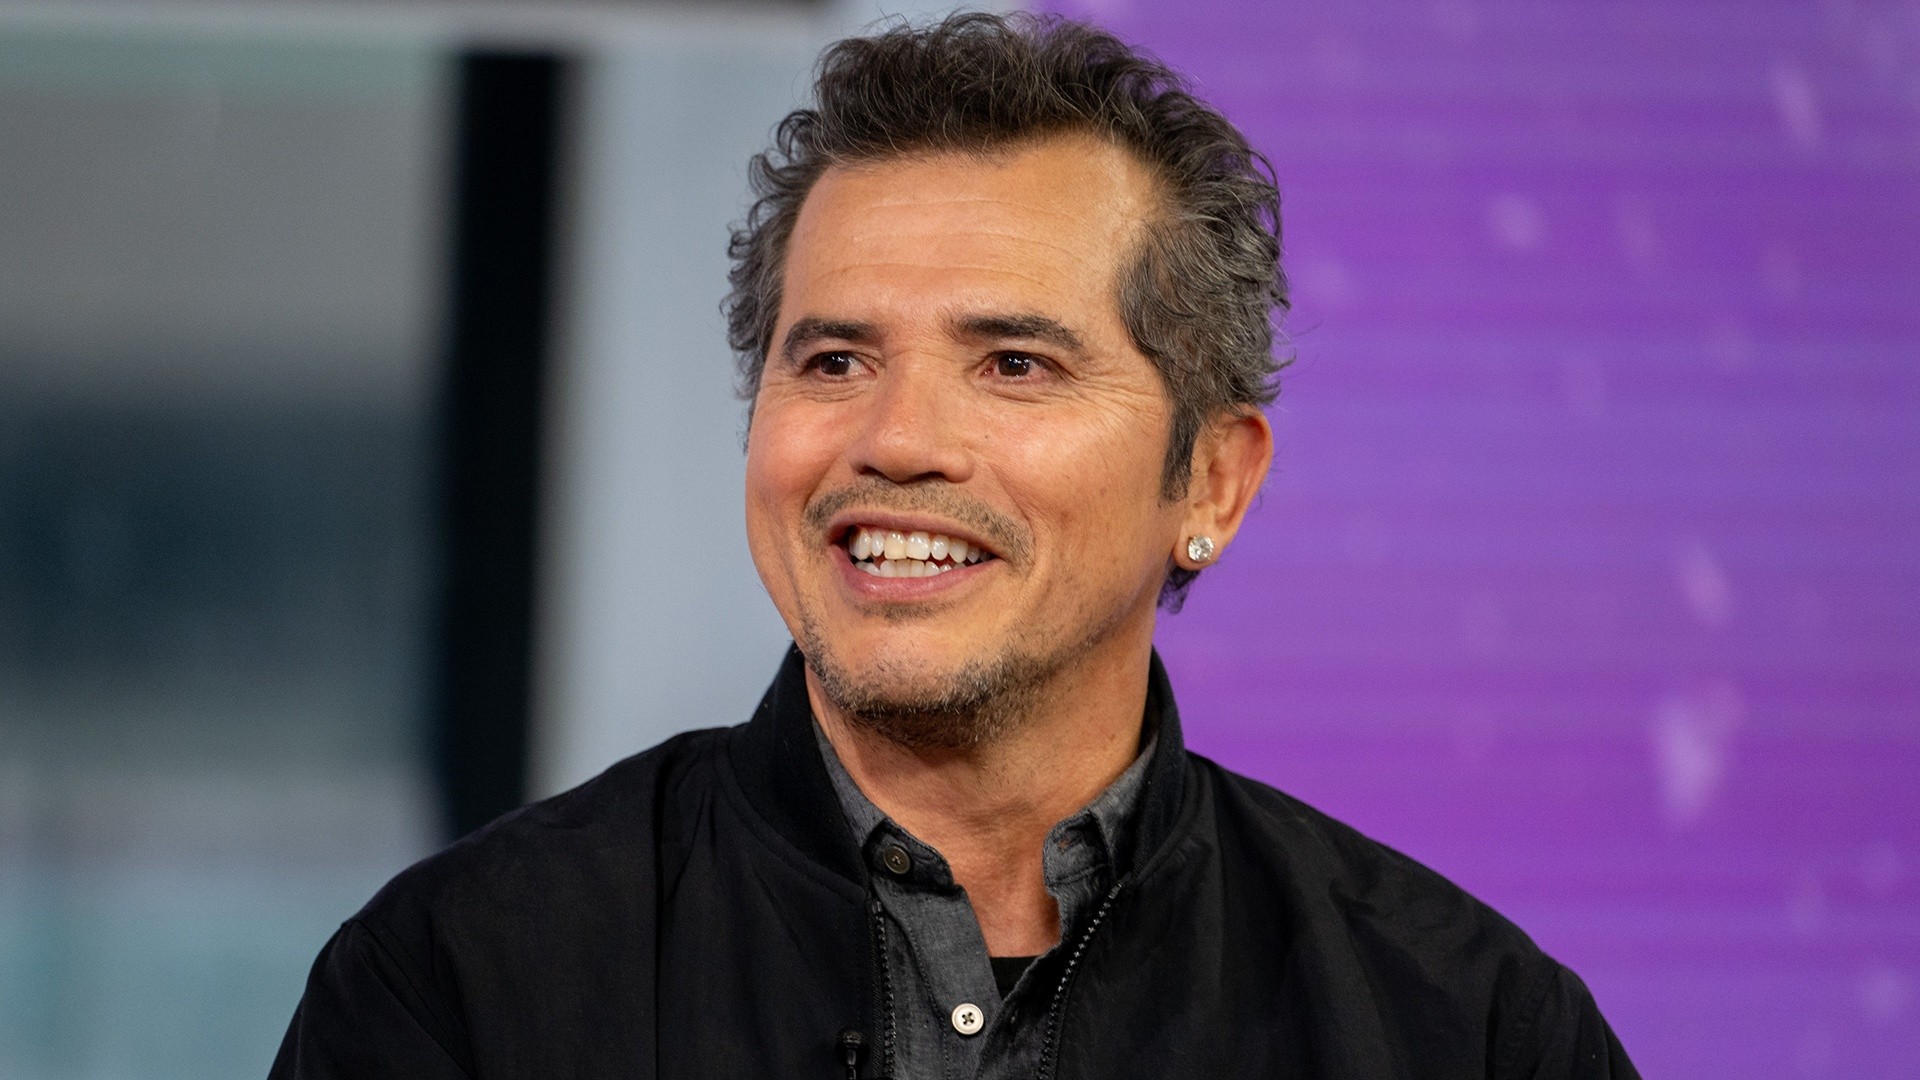 John Leguizamo Reveals Big Roles He Passed On: Why He Skipped 'Happy Feet' and More Blockbusters